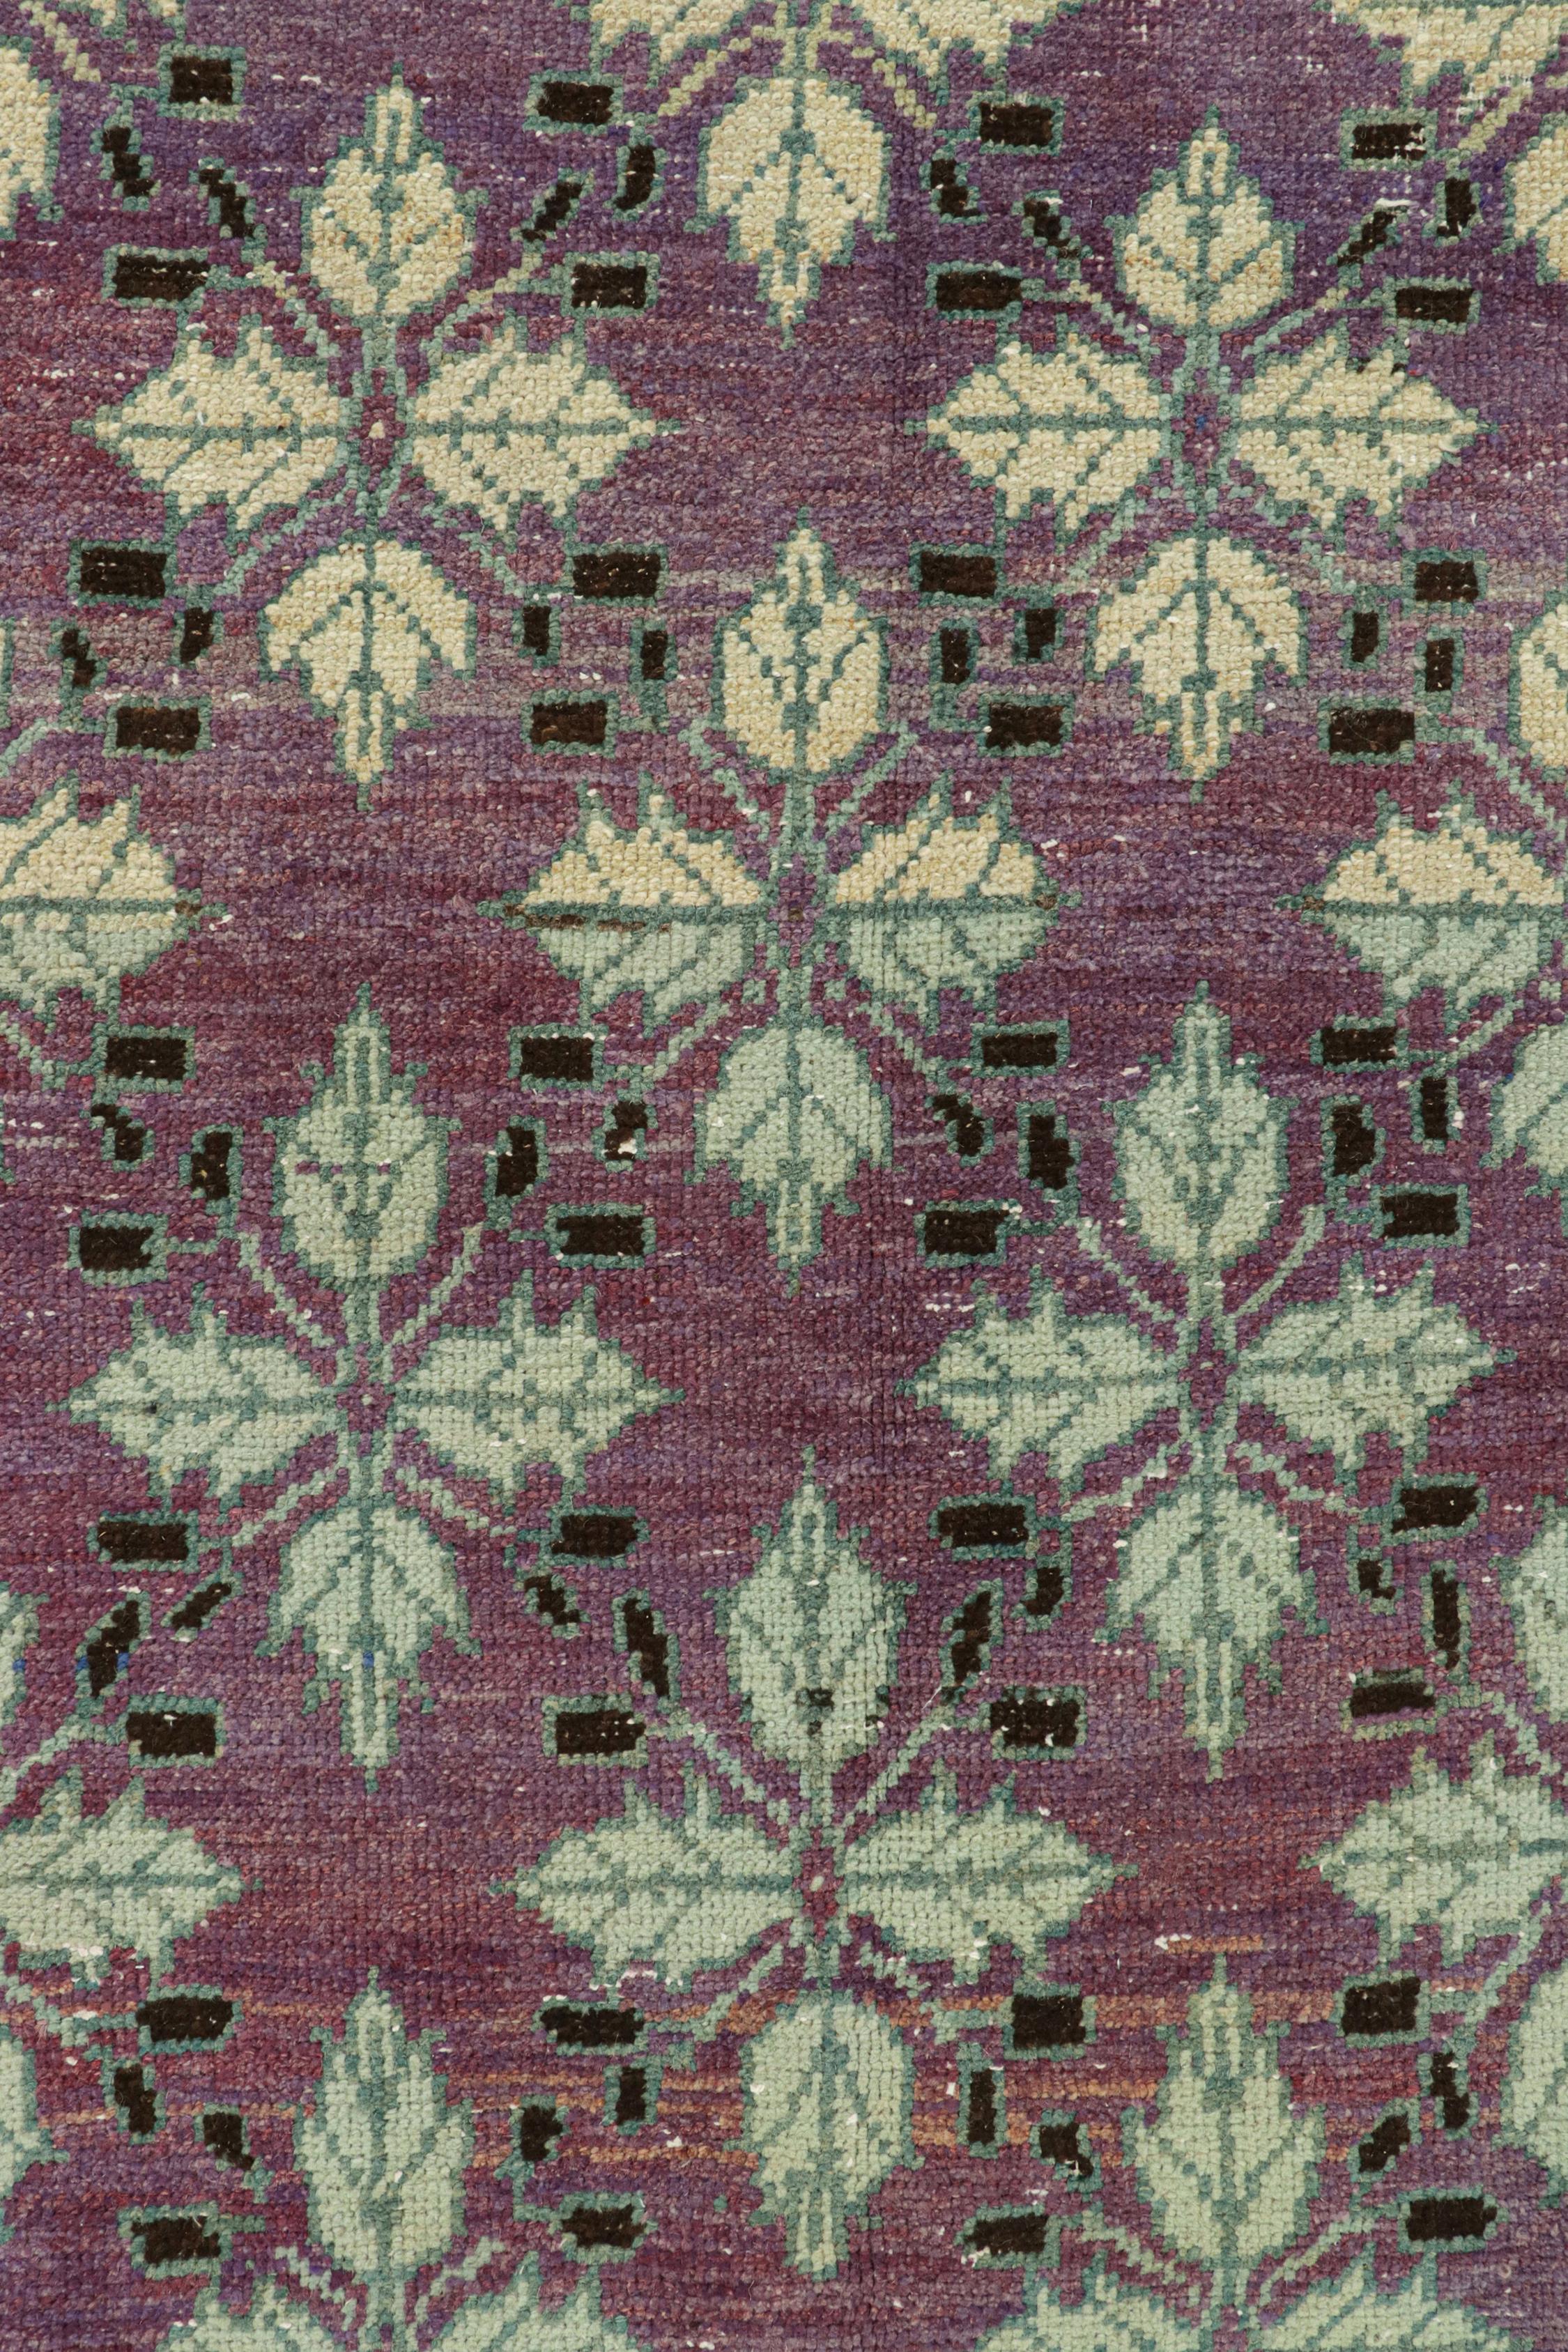 Vintage Zeki Müren Rug in Purple with Floral Patterns, by Rug & Kilim In Good Condition For Sale In Long Island City, NY